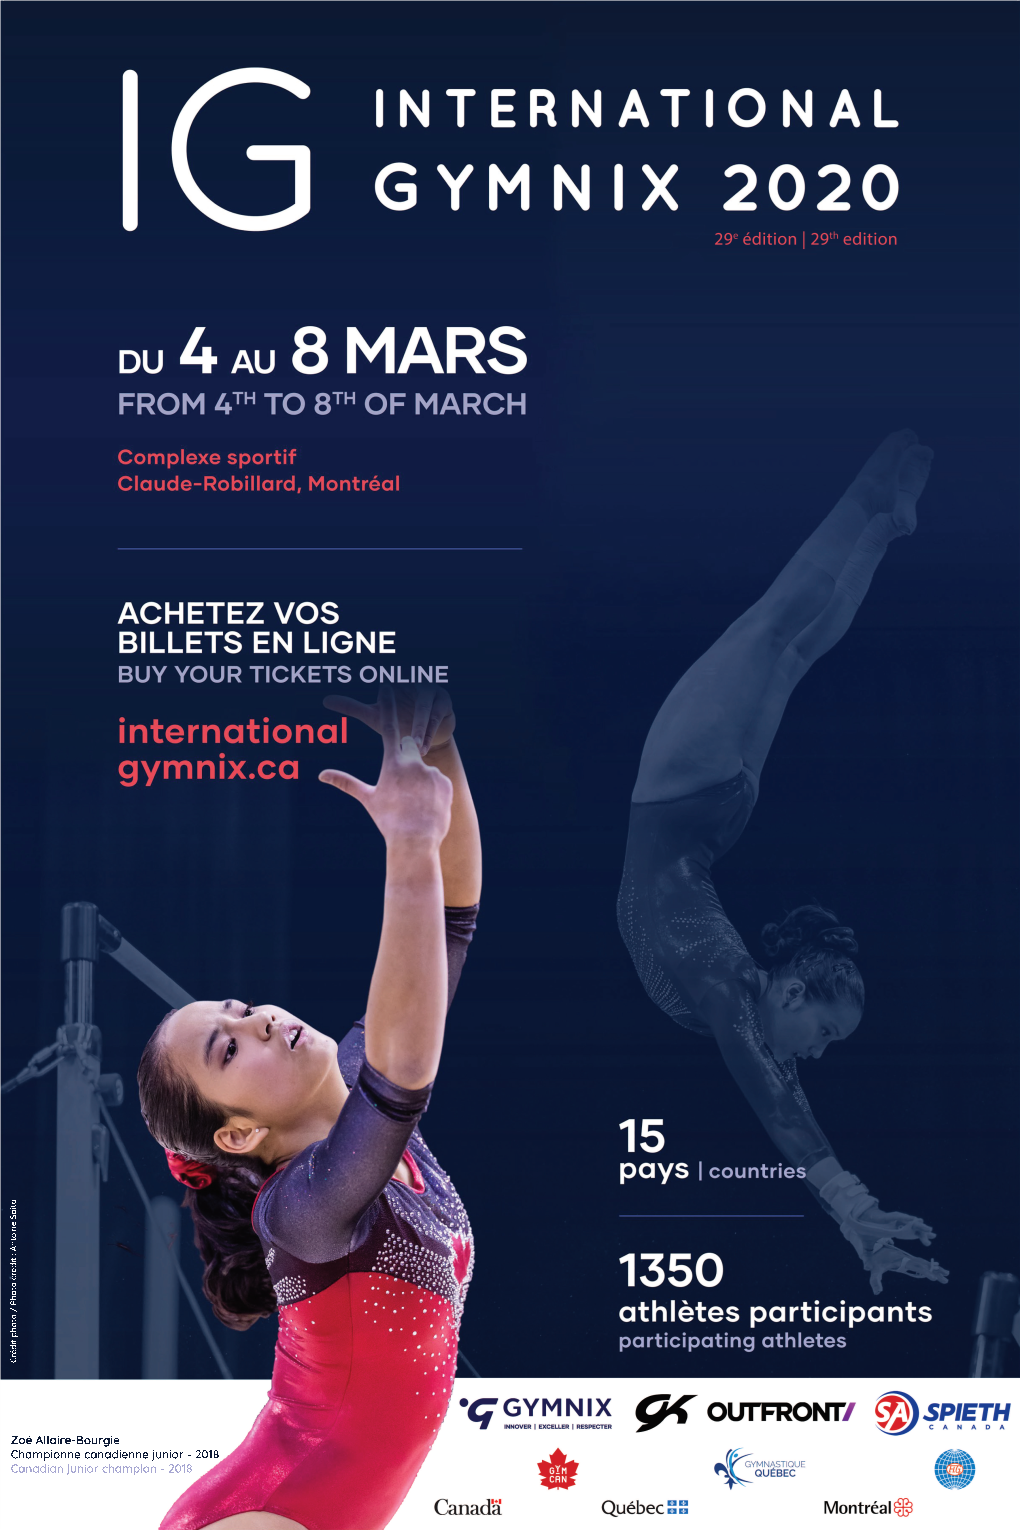 IG 2020! in Pleasure to Welcome You in the Gymnastics As the Entrance of the Spectators